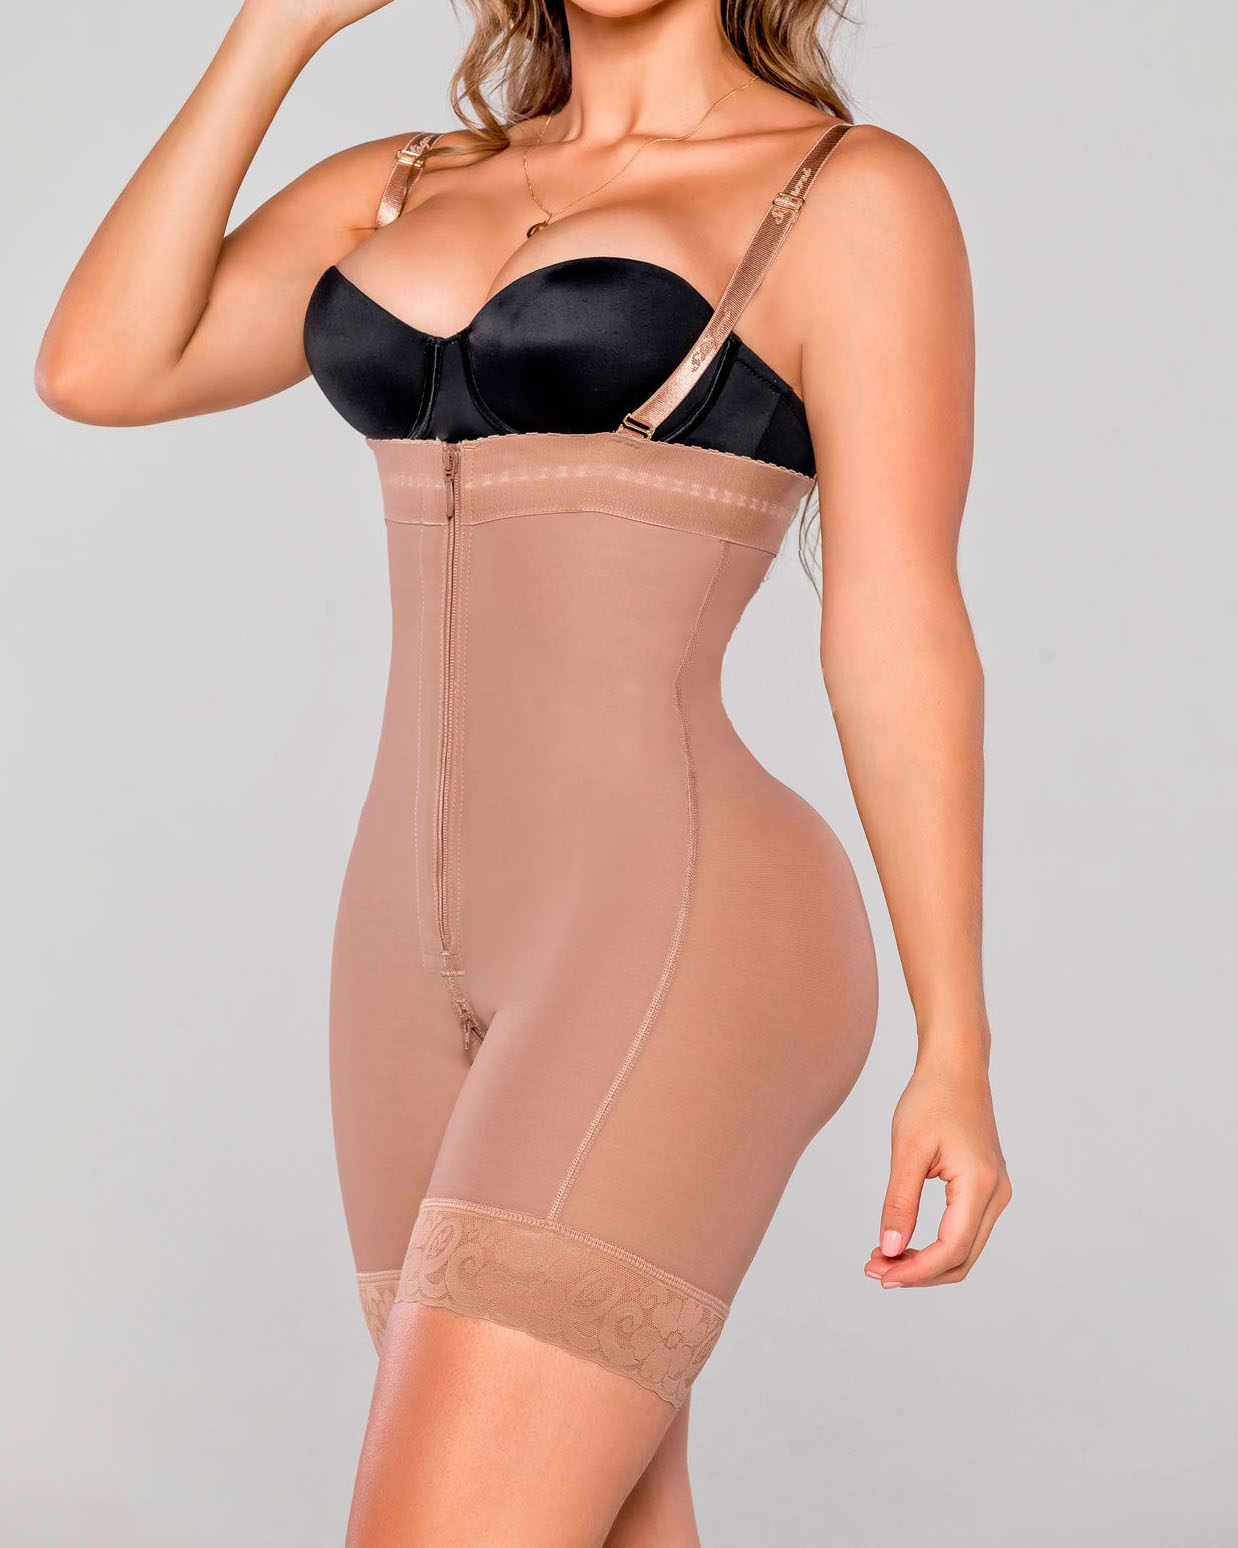 ChicCurve Women's High-Waisted Butt Lifter Shapewear JM3 Brown Size XL NWT